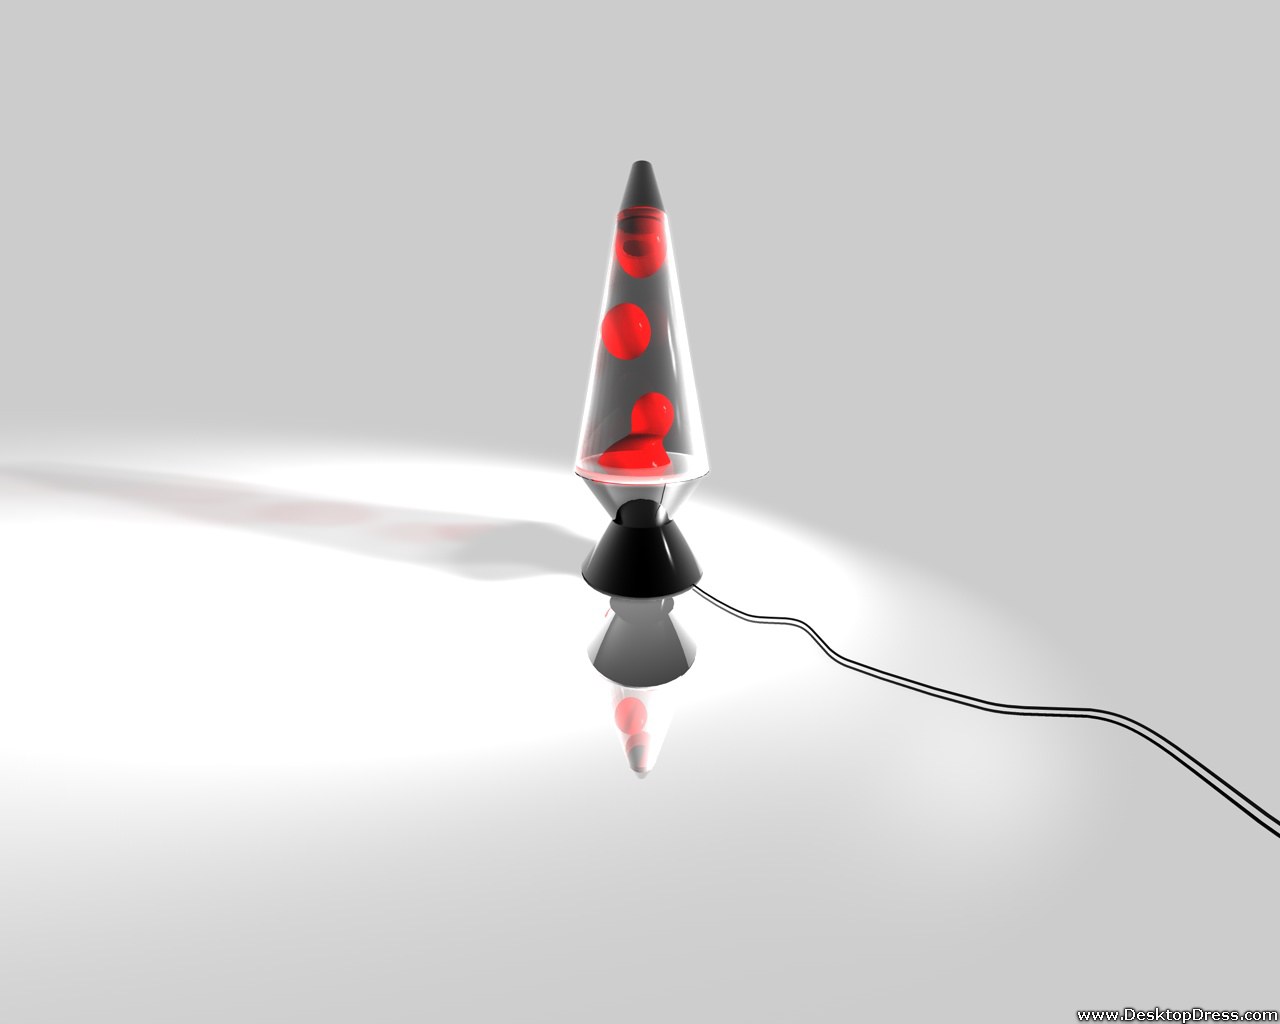 Lava Lamp Red - Missile - HD Wallpaper 